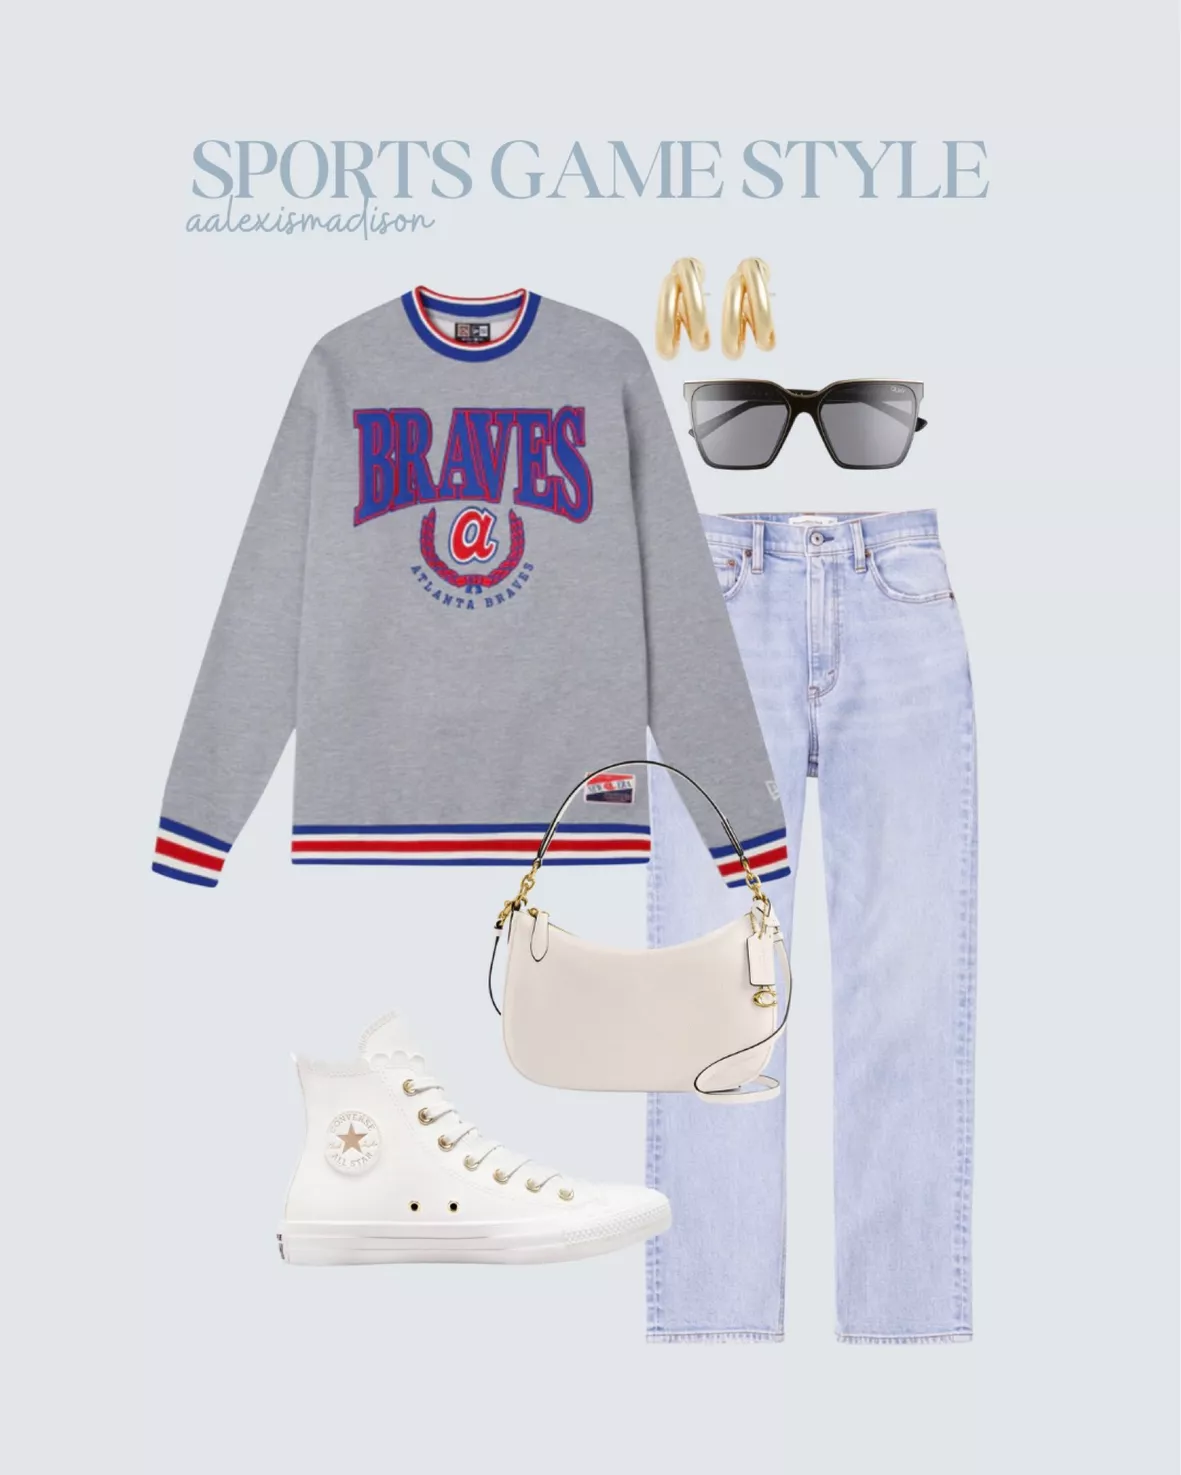 Baseball Game Outfits  Atlanta braves outfit, Braves game outfit